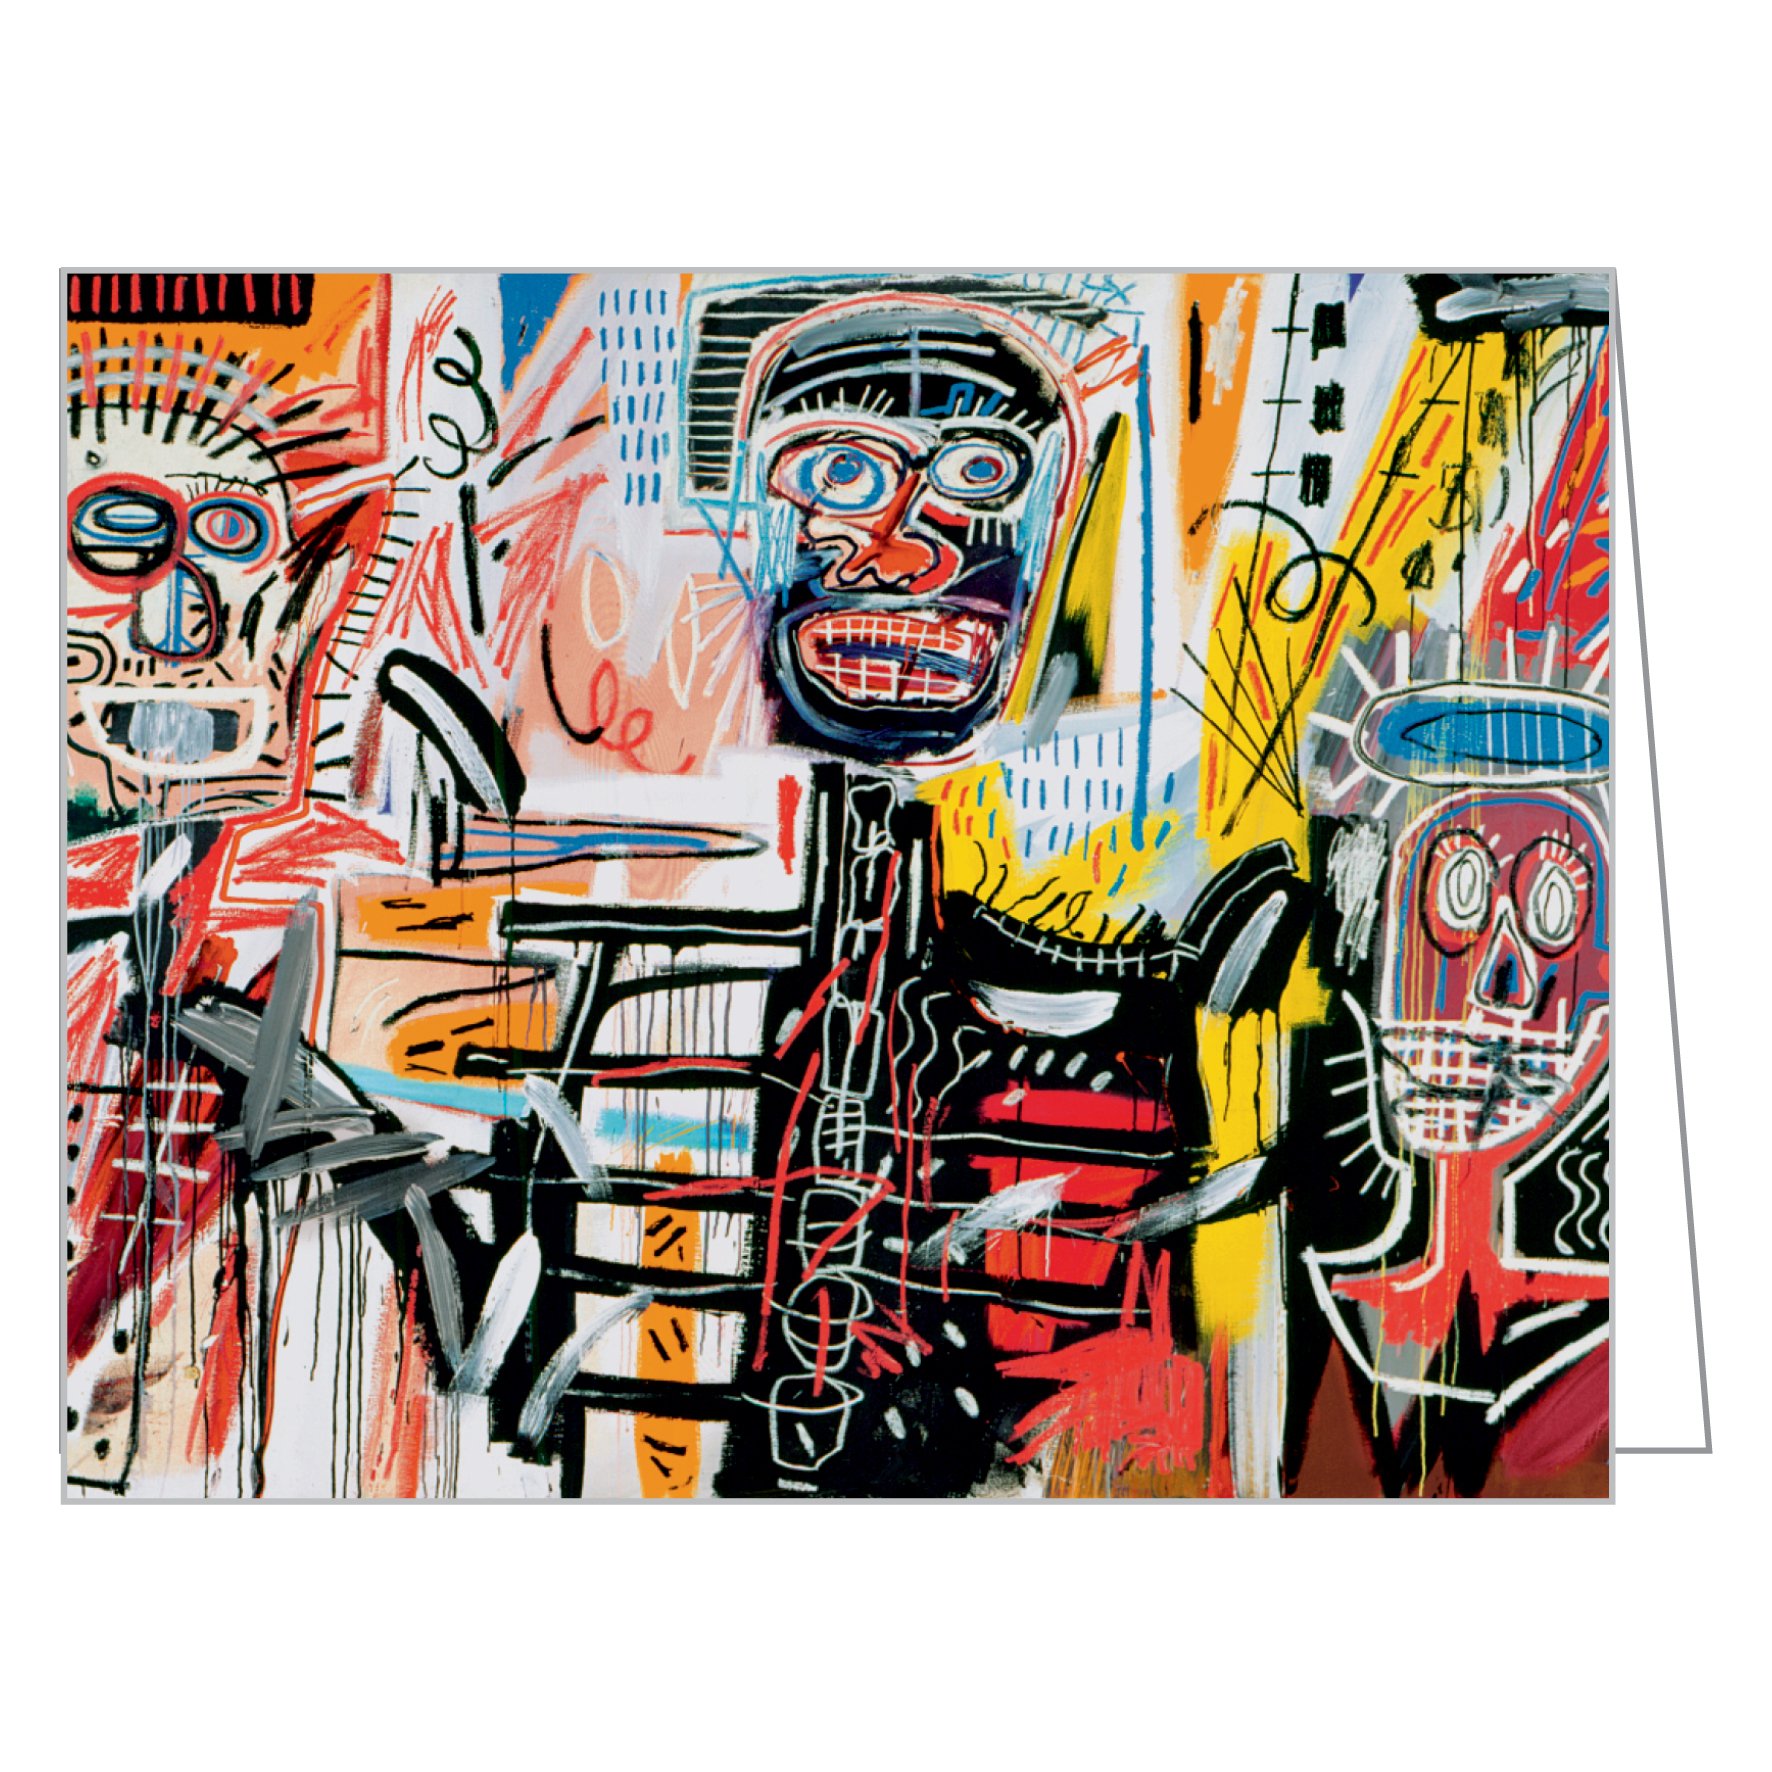 Jean-Michel Basquiat's 1983 'Crown' painting, to notecard box, by teNeues stationery.